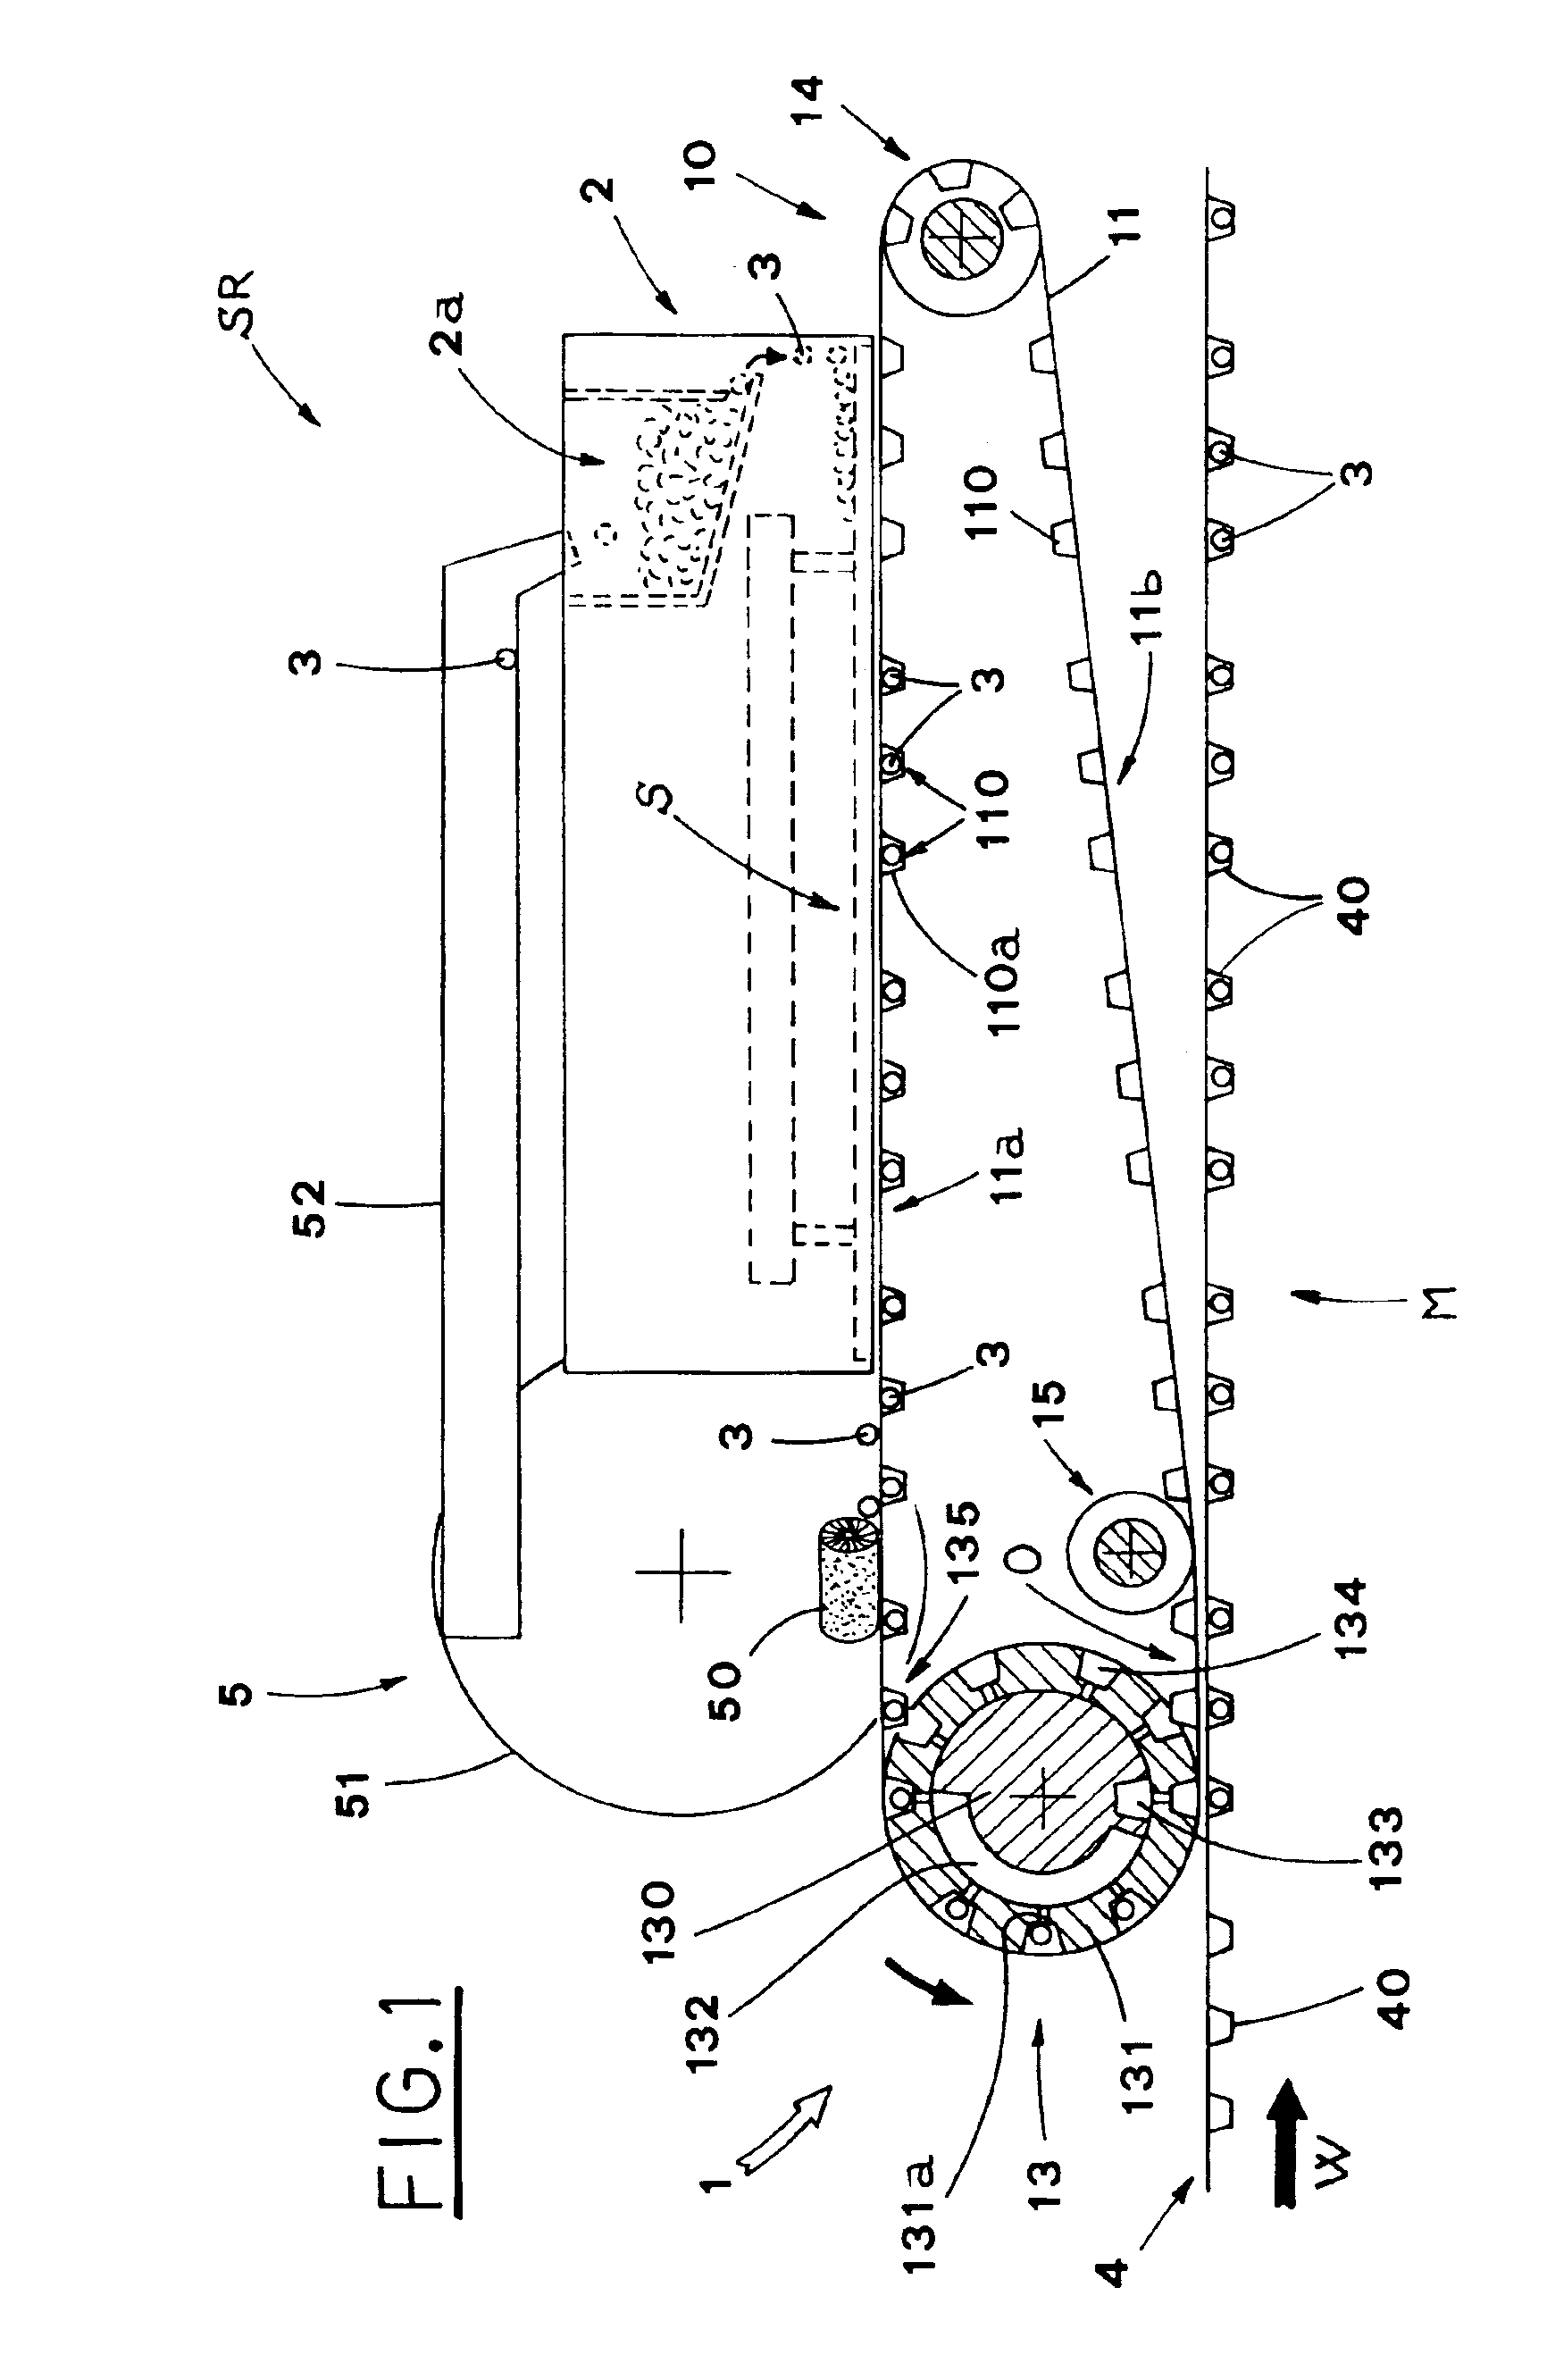 Unit for feeding products to a blistering machine